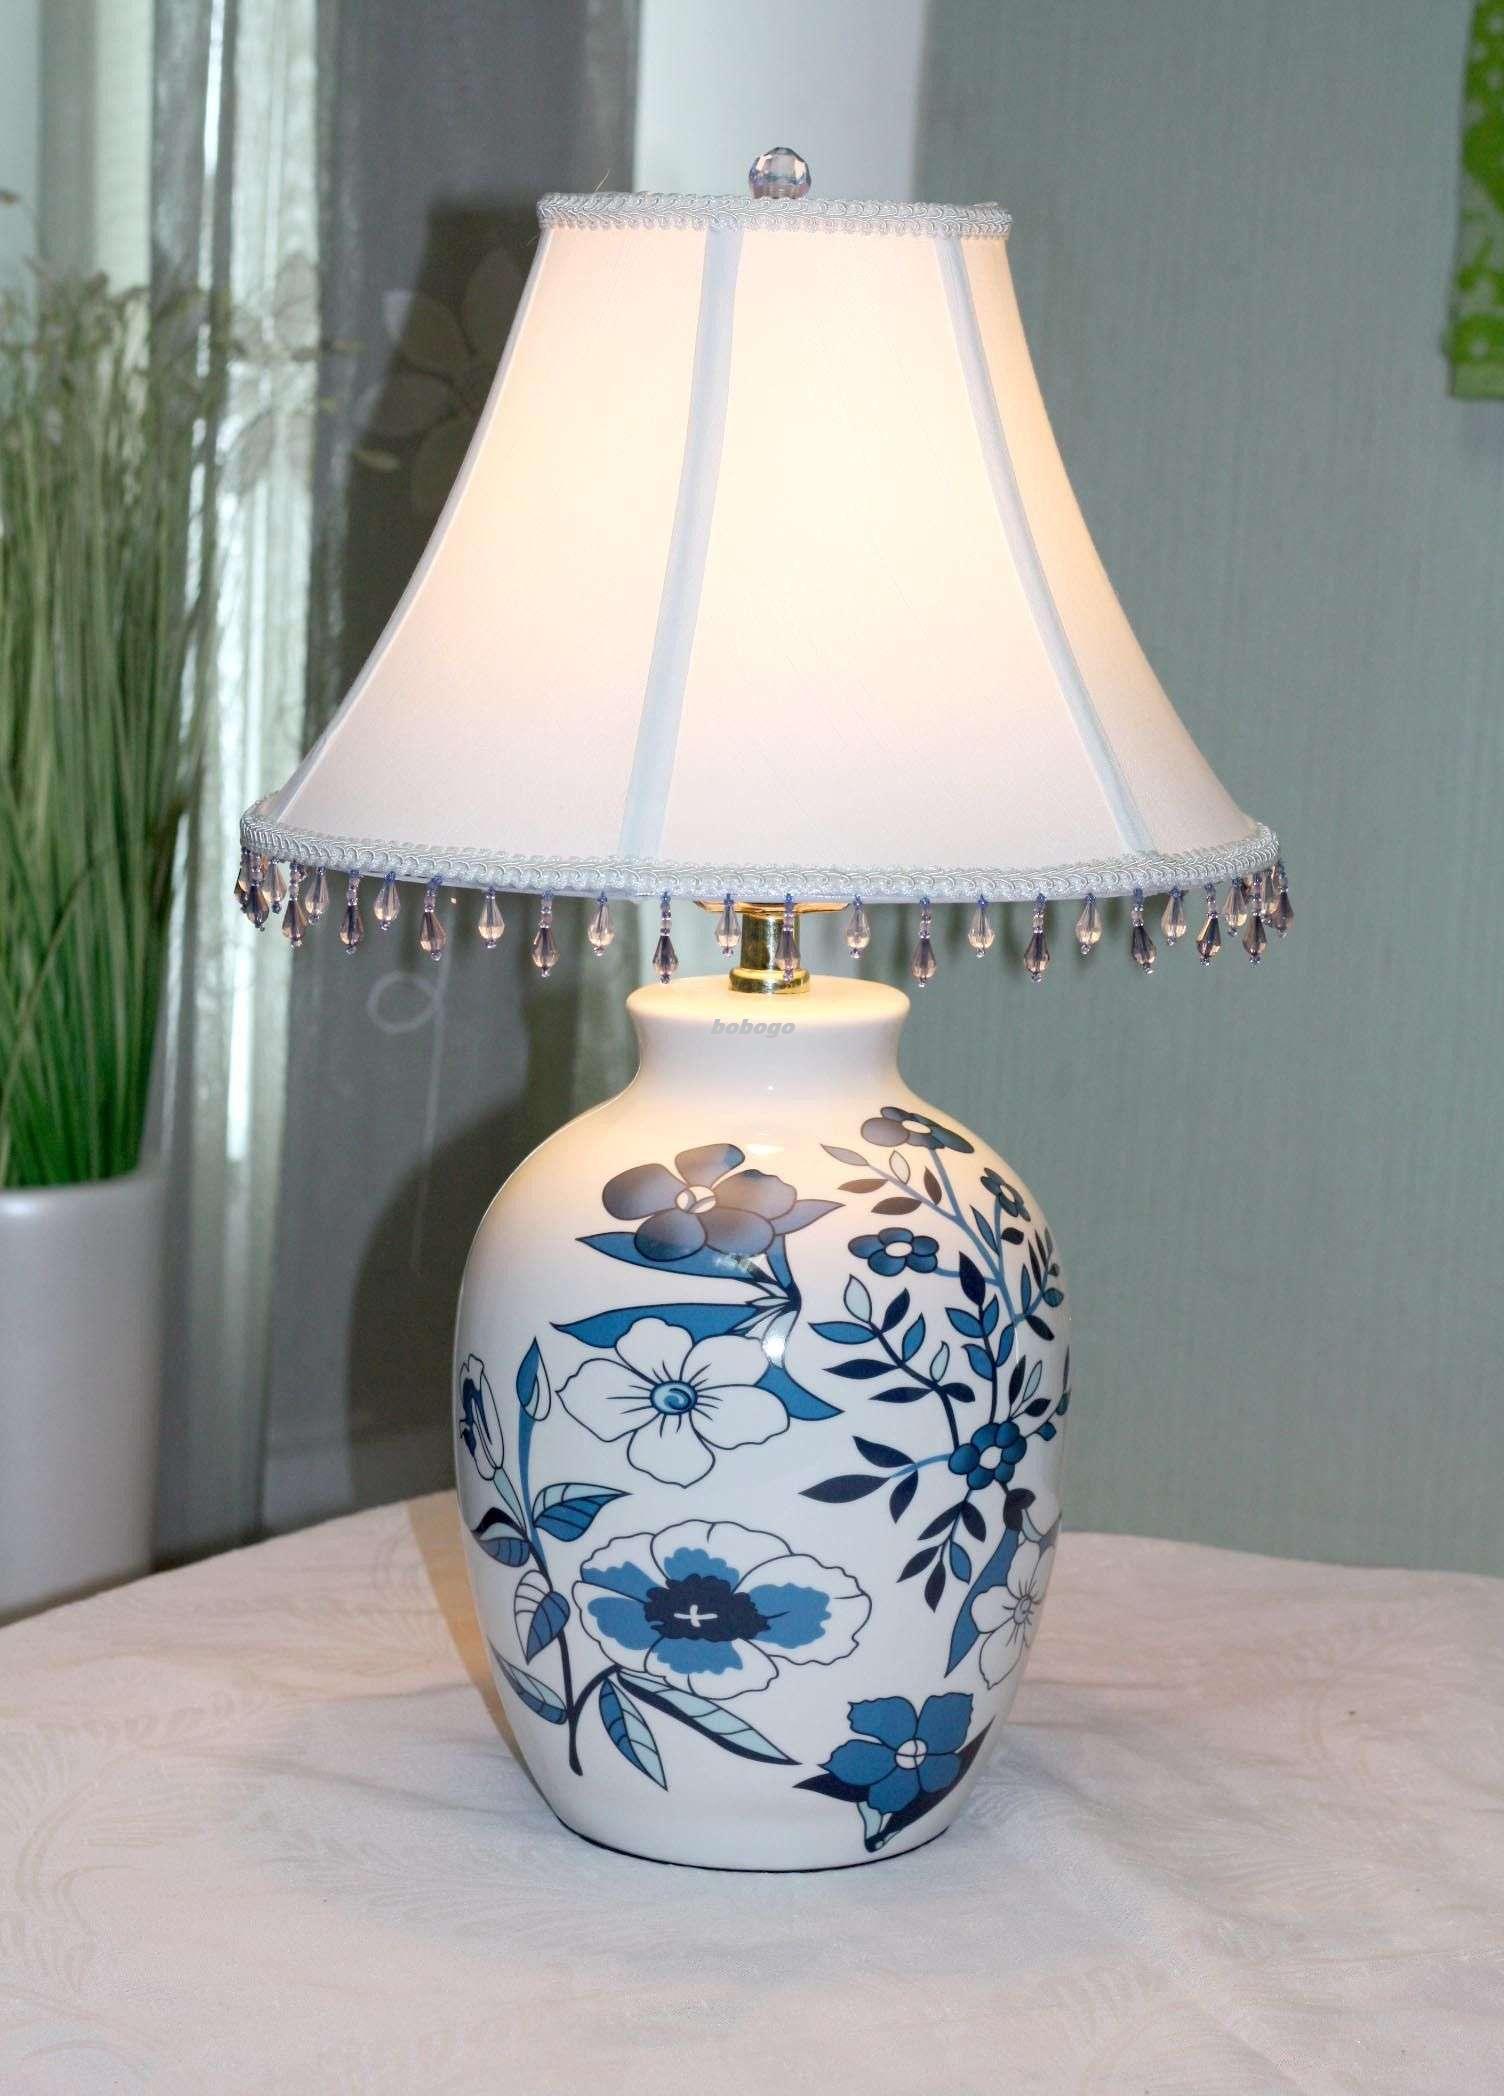 Top 50 Modern Table Lamps for Living Room Ideas - Home Decor Ideas